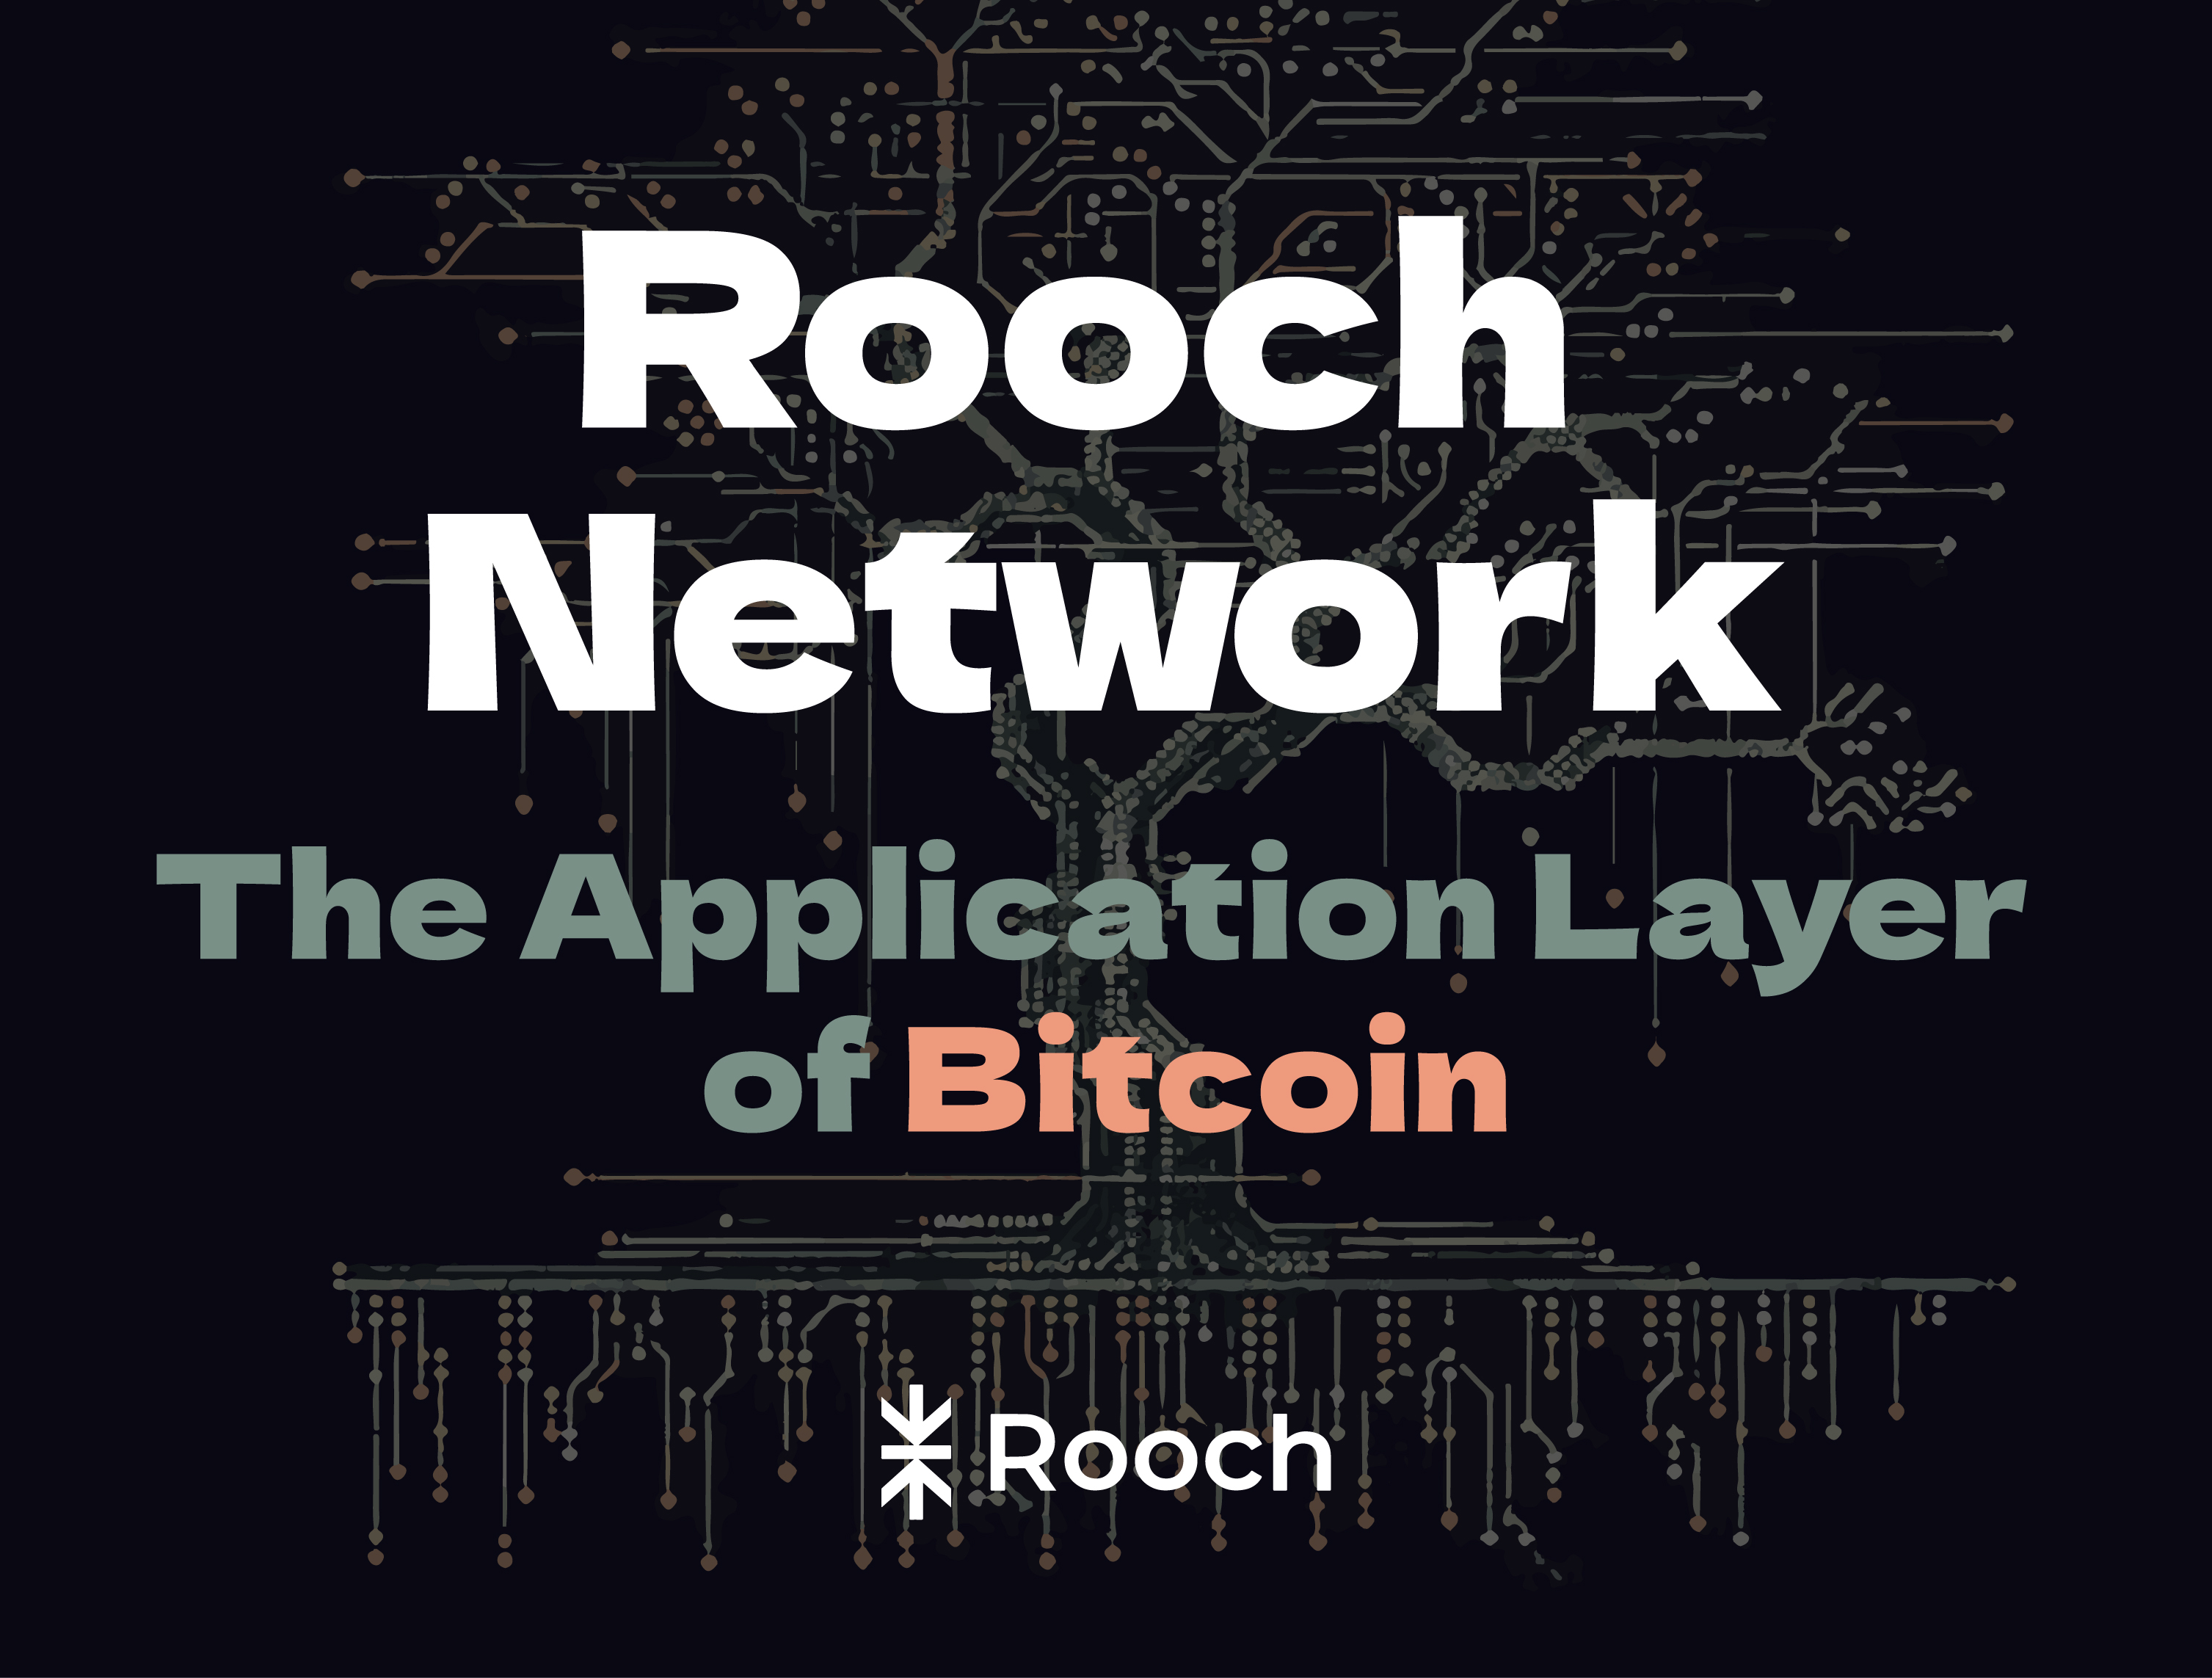 Rooch Network - The Application Layer of Bitcoin